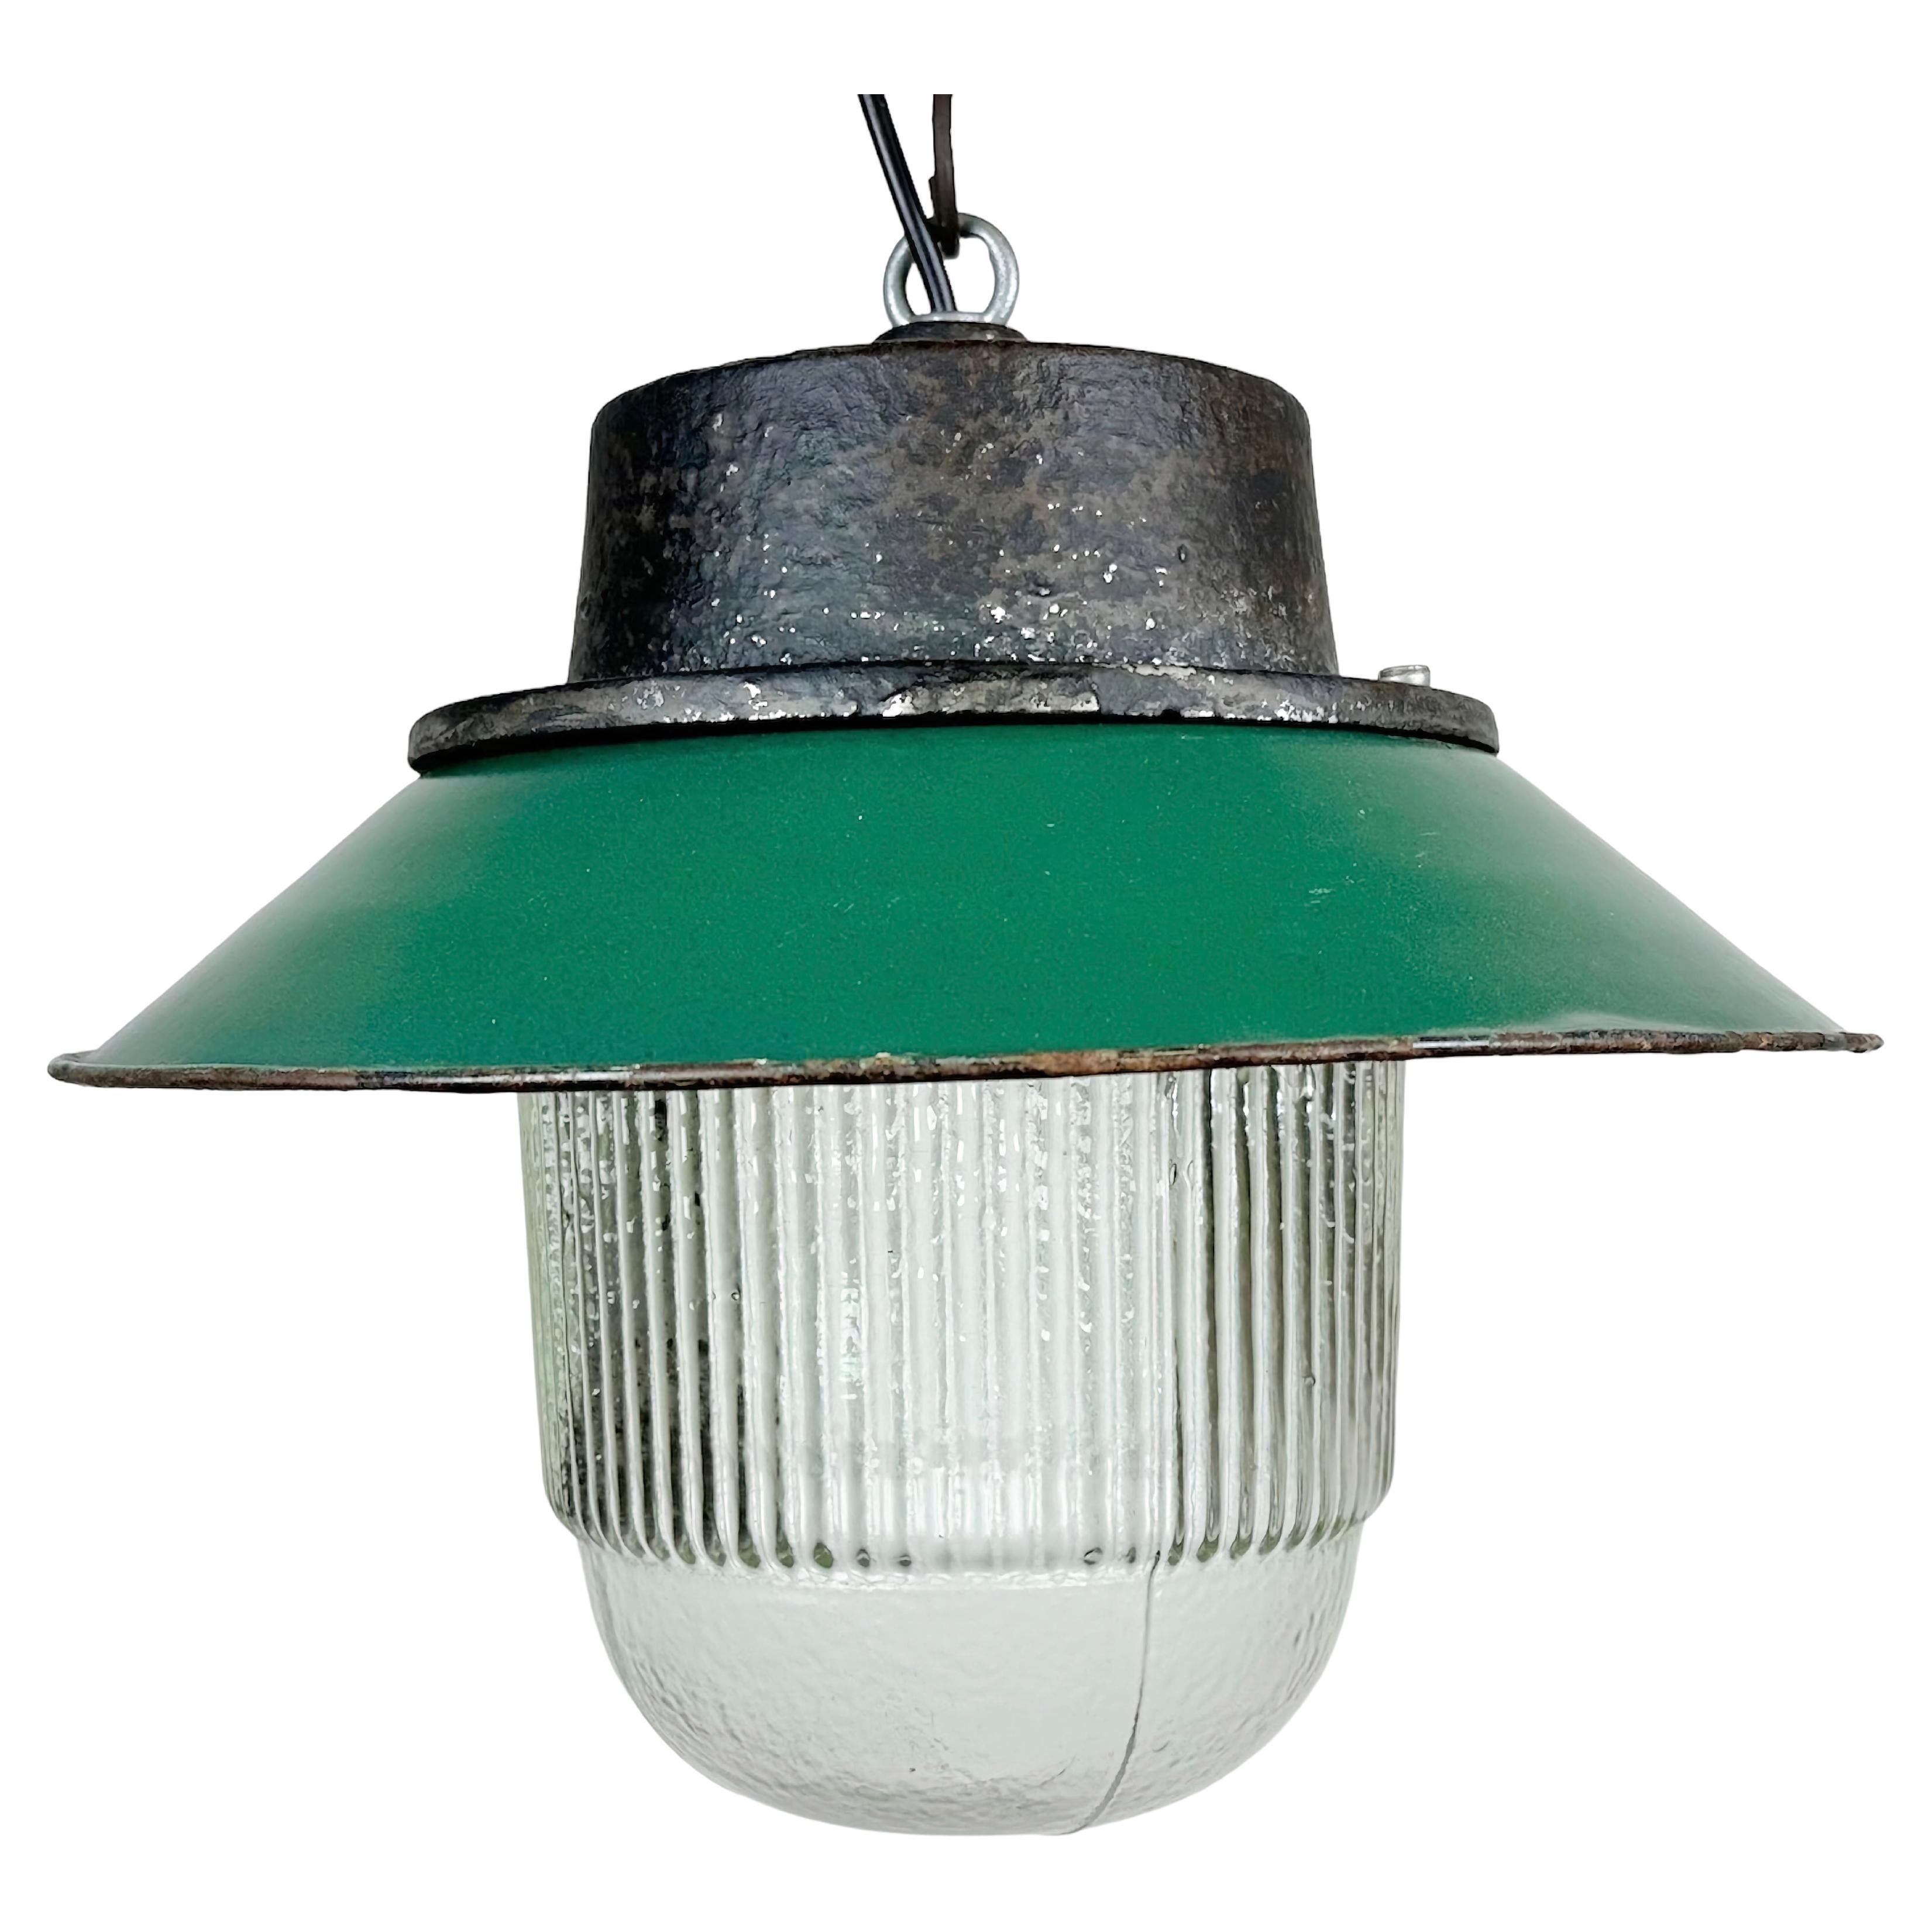 Green Enamel and Cast Iron Industrial Pendant Light, 1960s